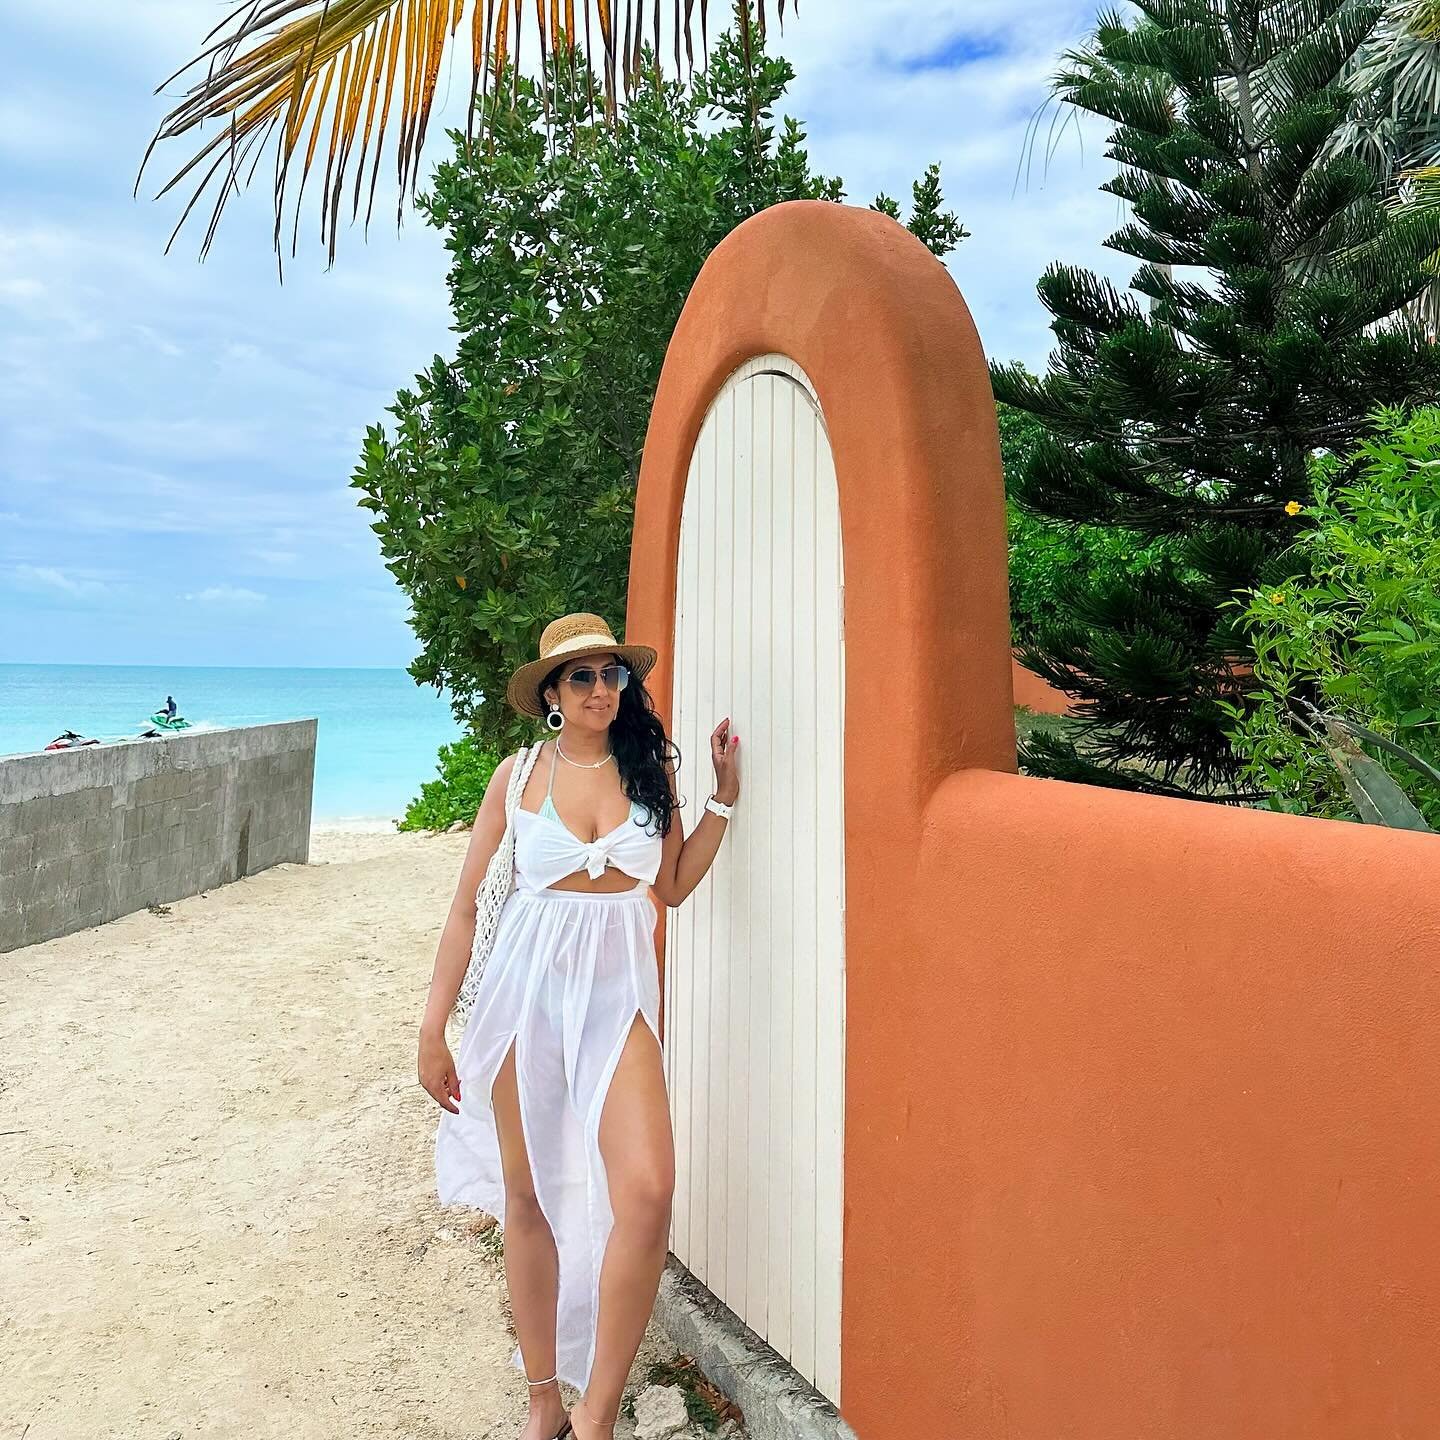 Island attire 🏝️👙🧴

Dress: @boohoo 🐚

Have a great rest of the week! 🤍

Turks and Caicos, Turks and Caicos Islands, Providenciales, Provo, travel inspo, swimwear, island vibes, travel with me, beach vacation, beach life, vacay vibes
#tci#turksan